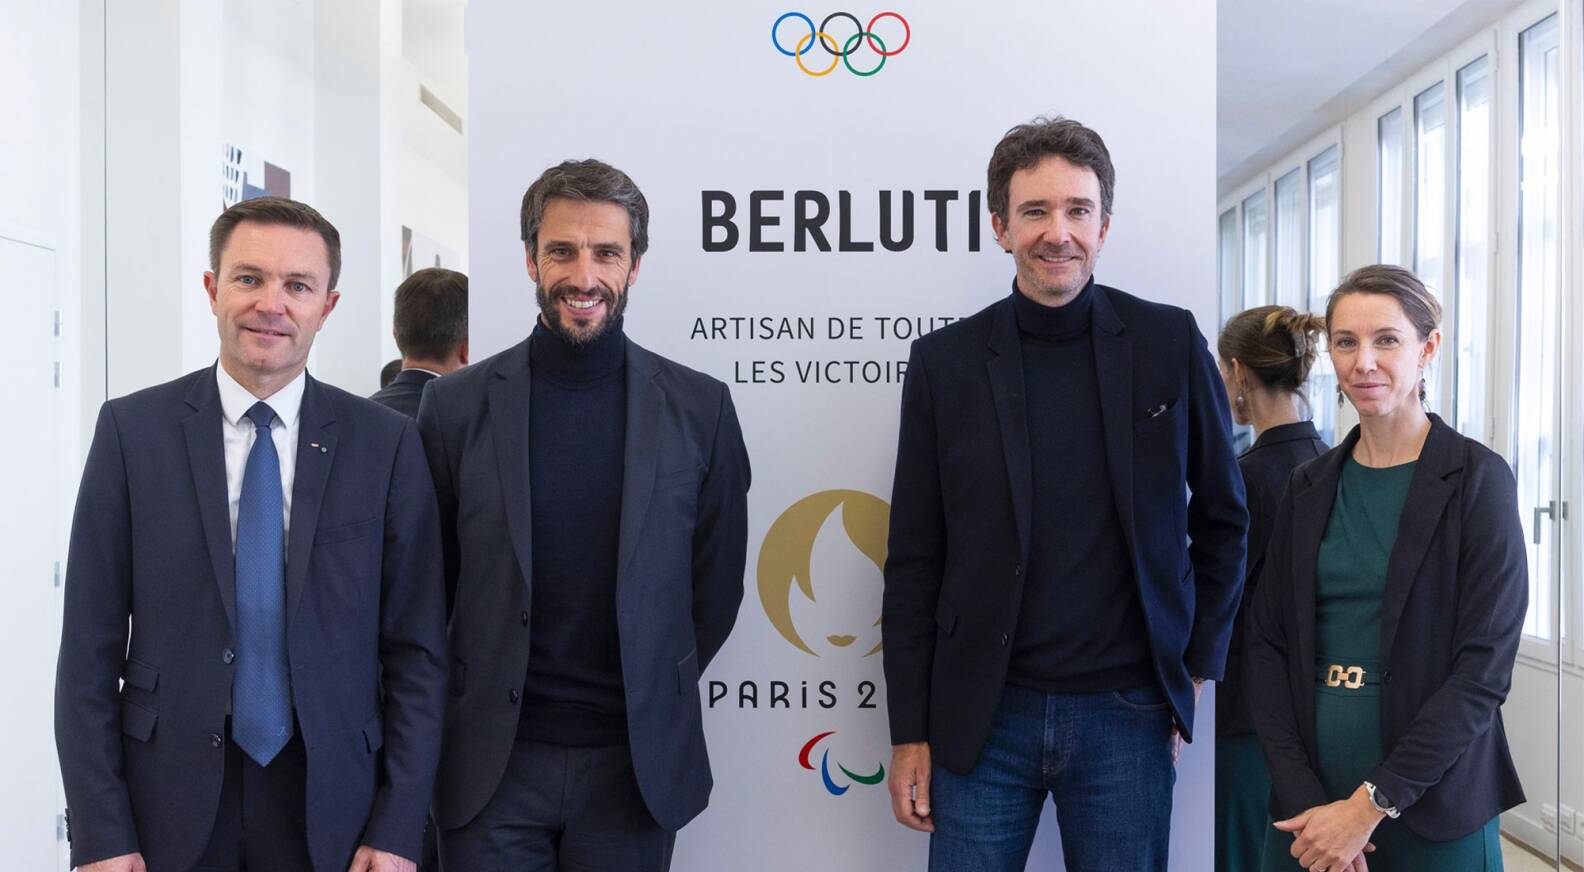 Berluti to design Team France's uniform for the Opening Ceremonies of Olympic and Paralympic Games Paris 2024